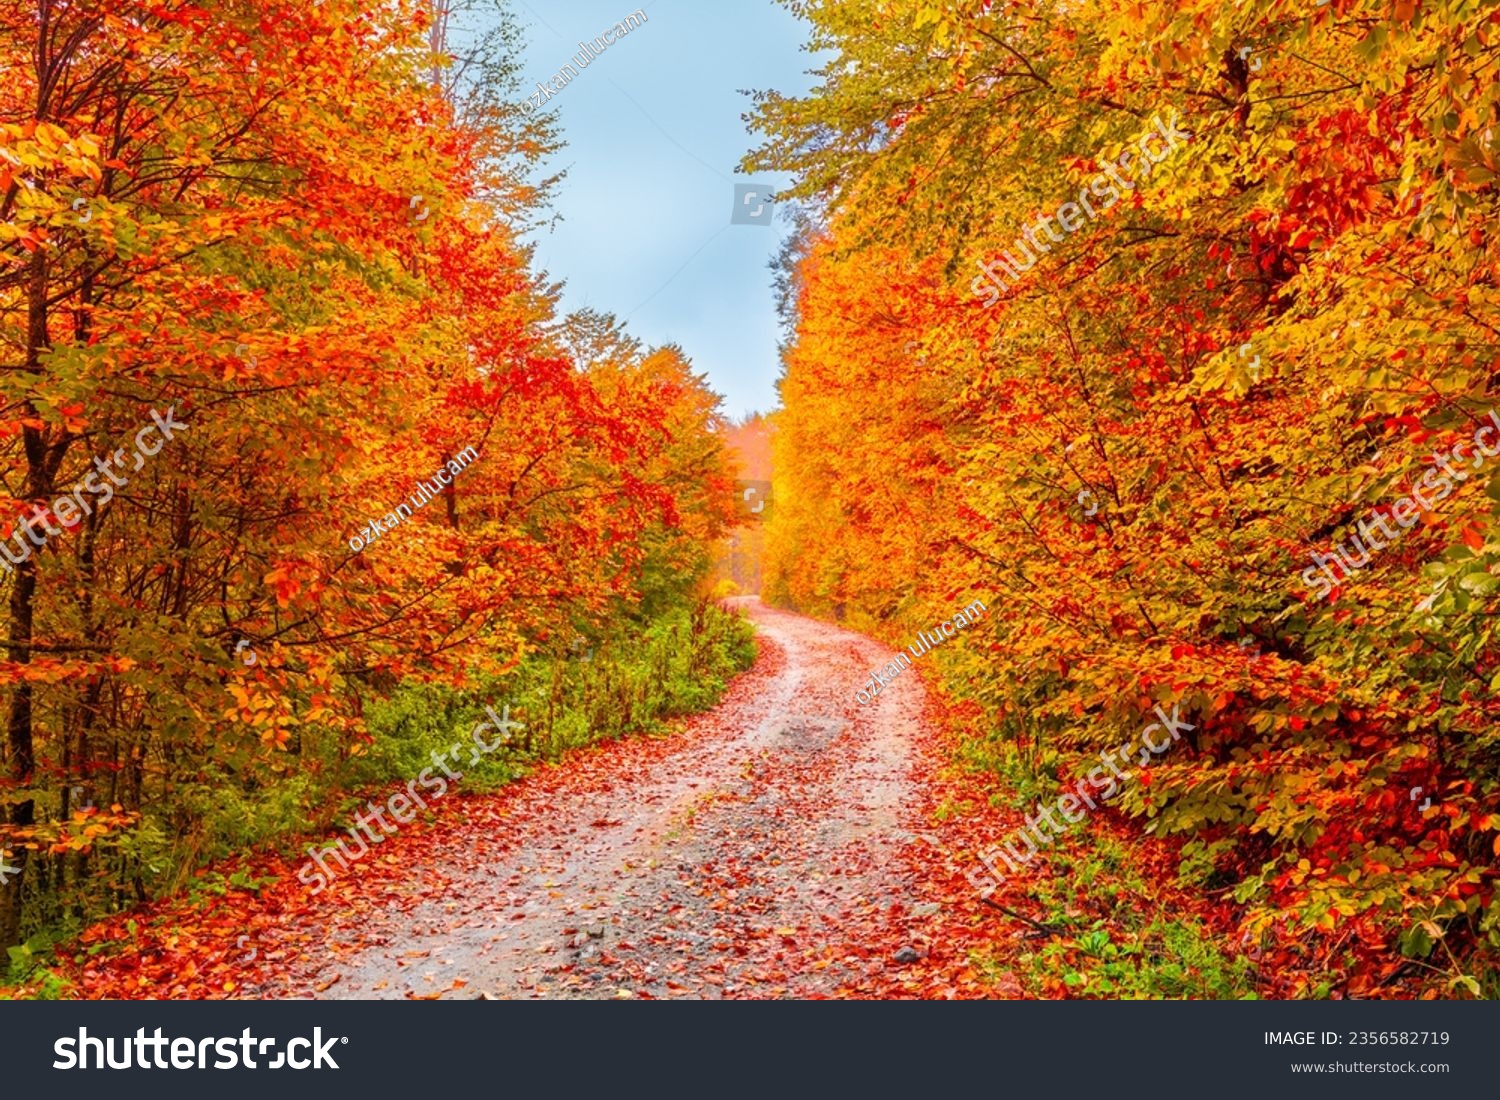 Autumn landscape in beautiful forest with colorful trees. colorful leaves of fall in nature. autumn season in japan. Road scenery in the jungle on mountain. Beautiful autumn colors. Autumn background. #2356582719